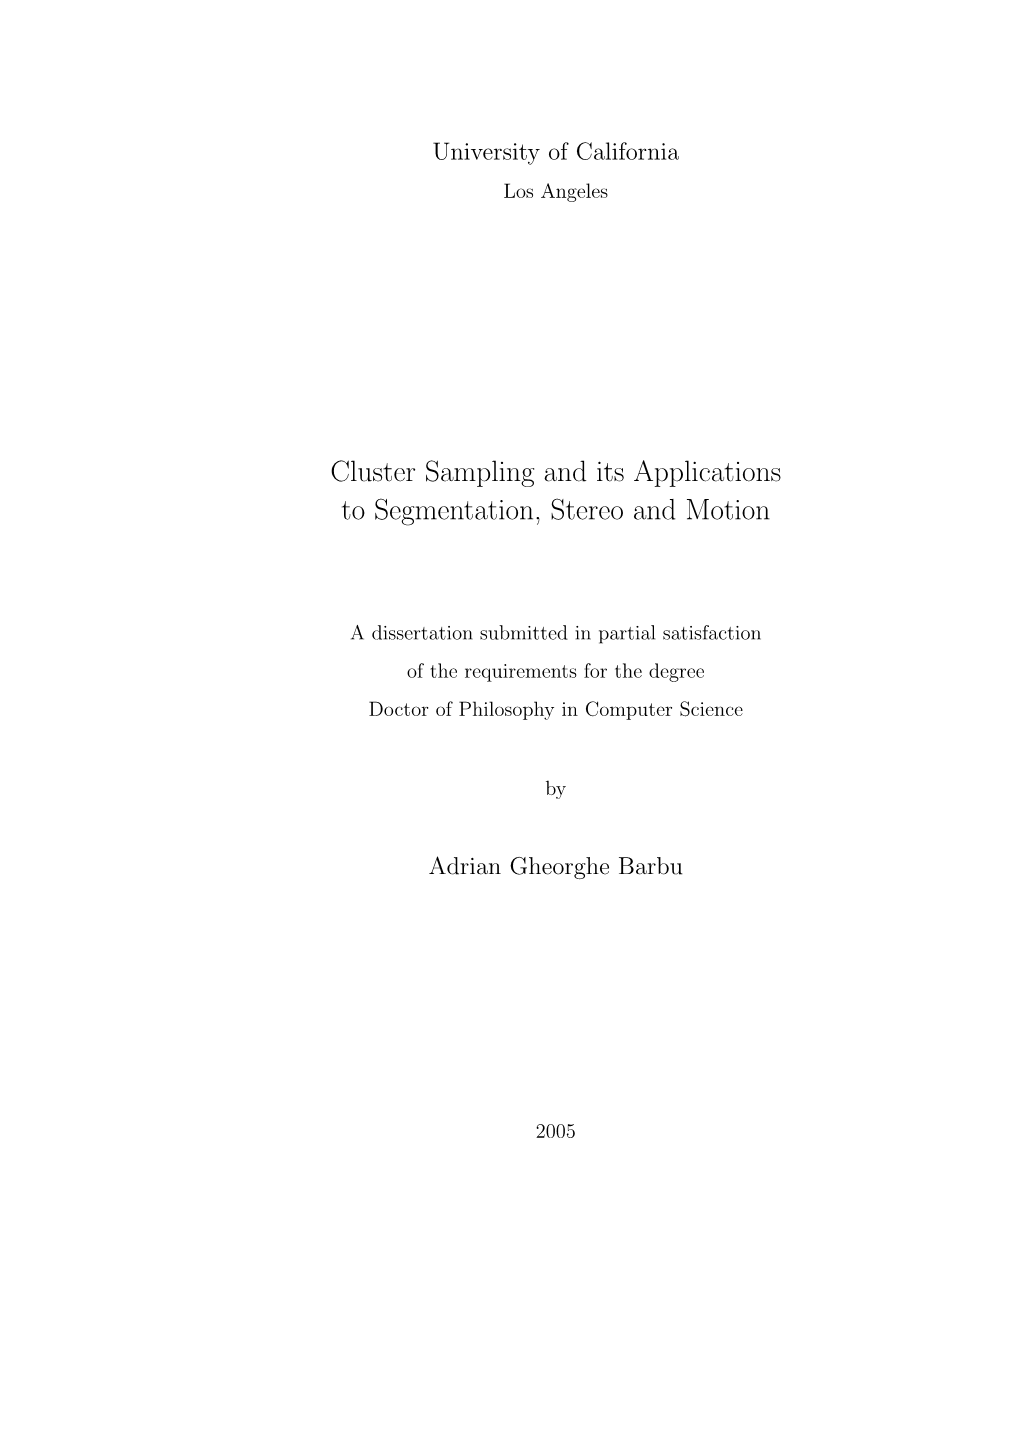 Cluster Sampling and Its Applications to Segmentation, Stereo and Motion